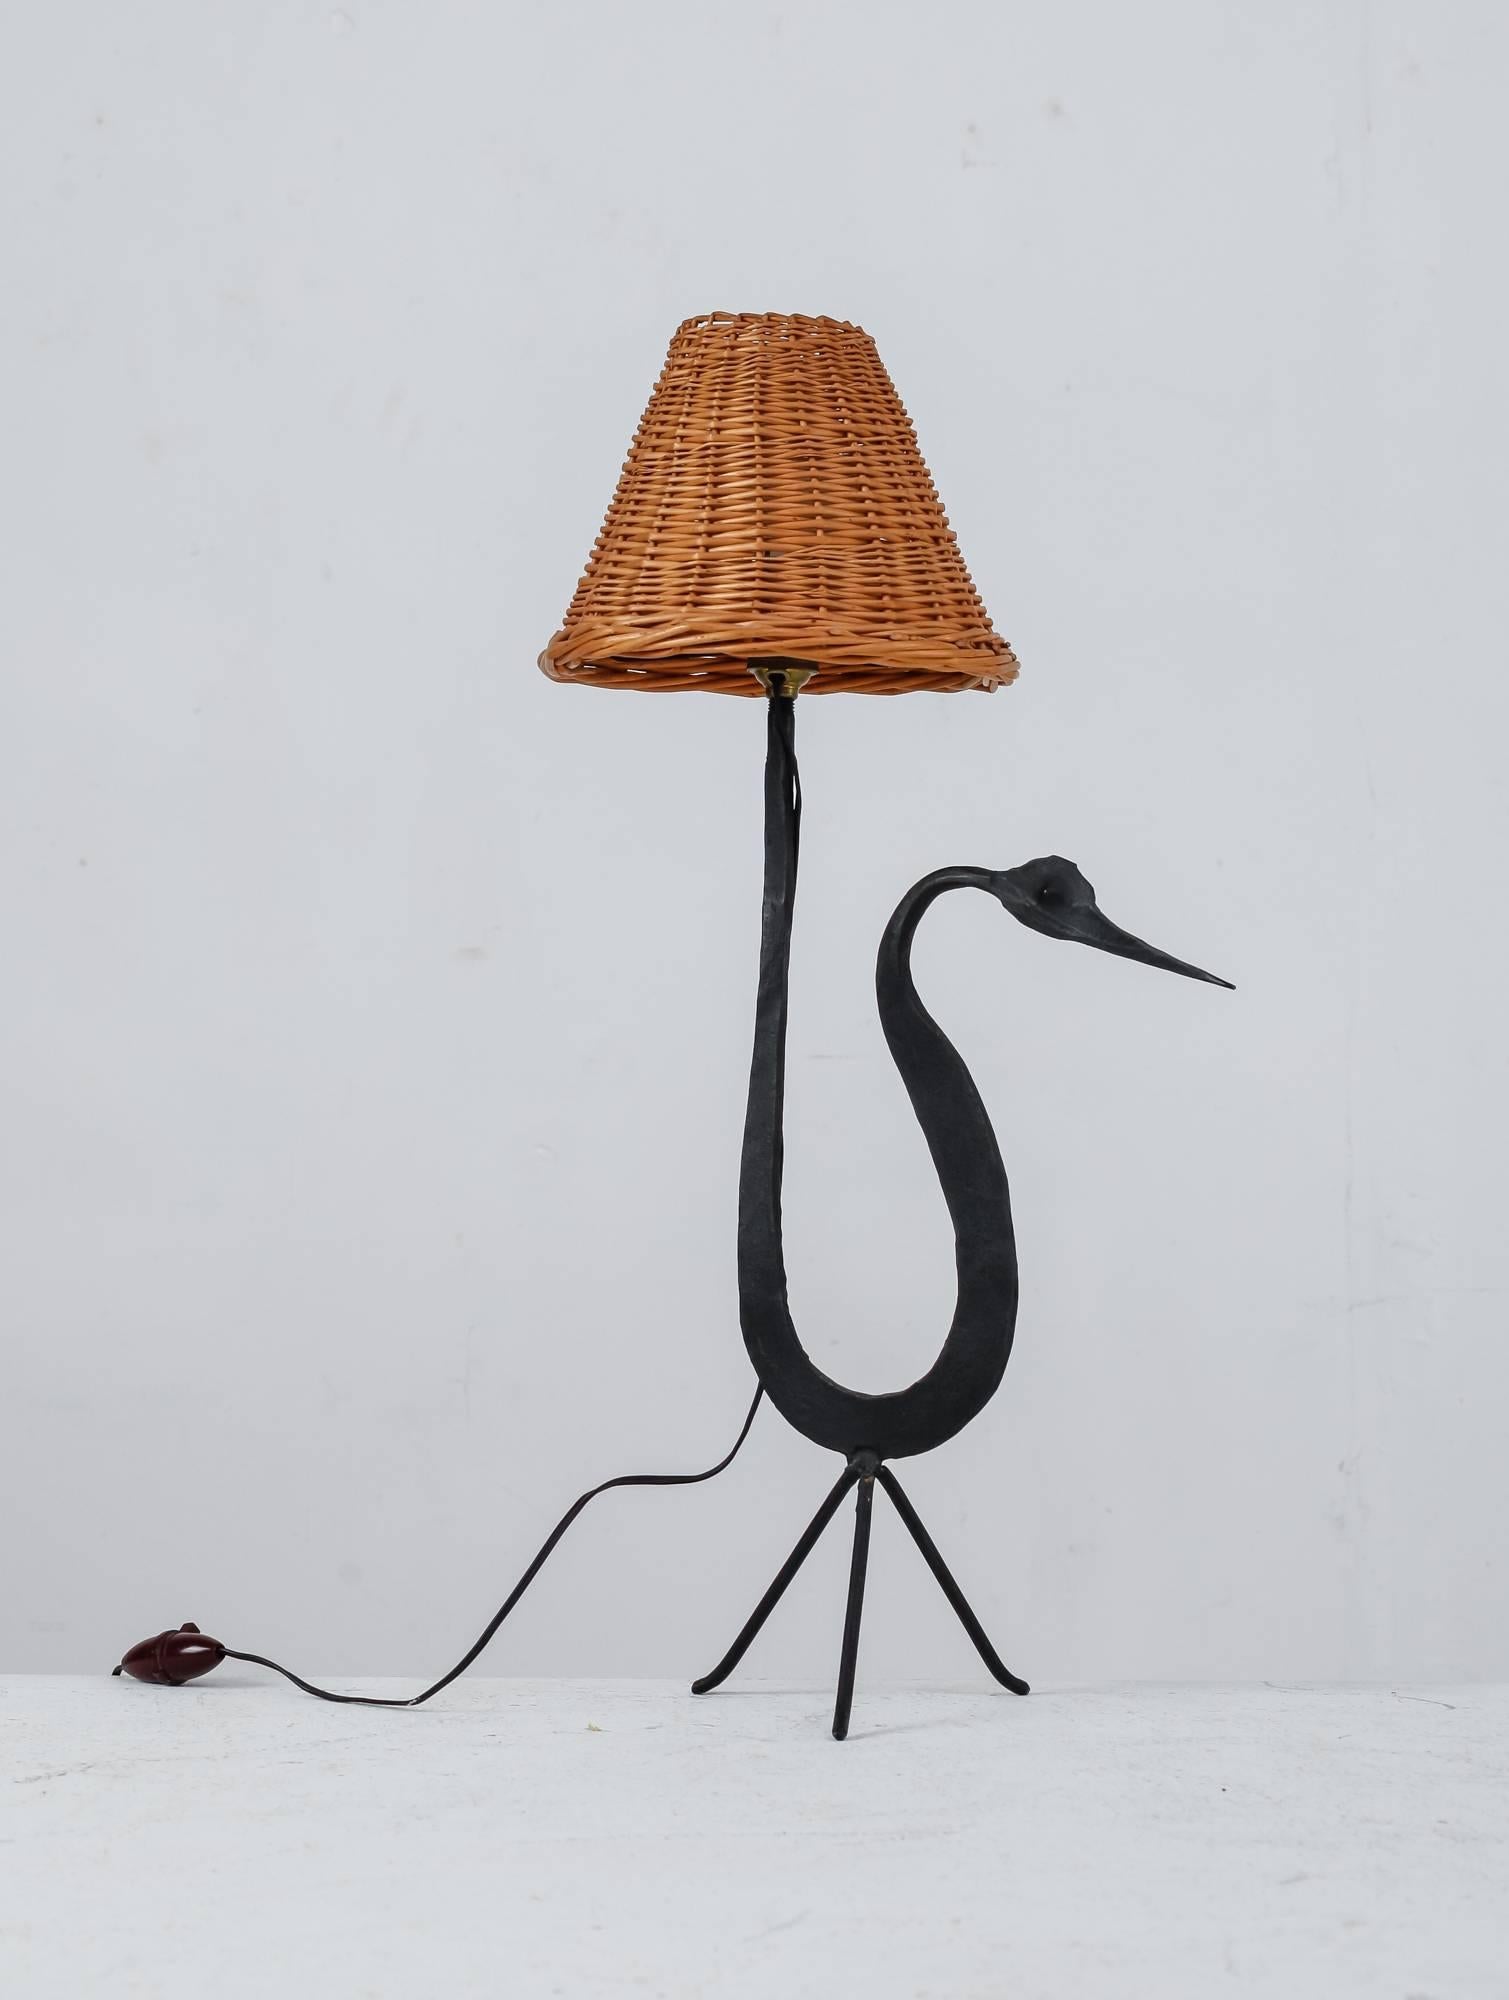 A small table lamp by Jean Touret for Atelier Marolles.
The lamp is made of a sculptural, bird-shaped iron frame with a wicker hood.

This piece was part of a large estate of Touret items, bought directly from the sons of the owners. The Atelier